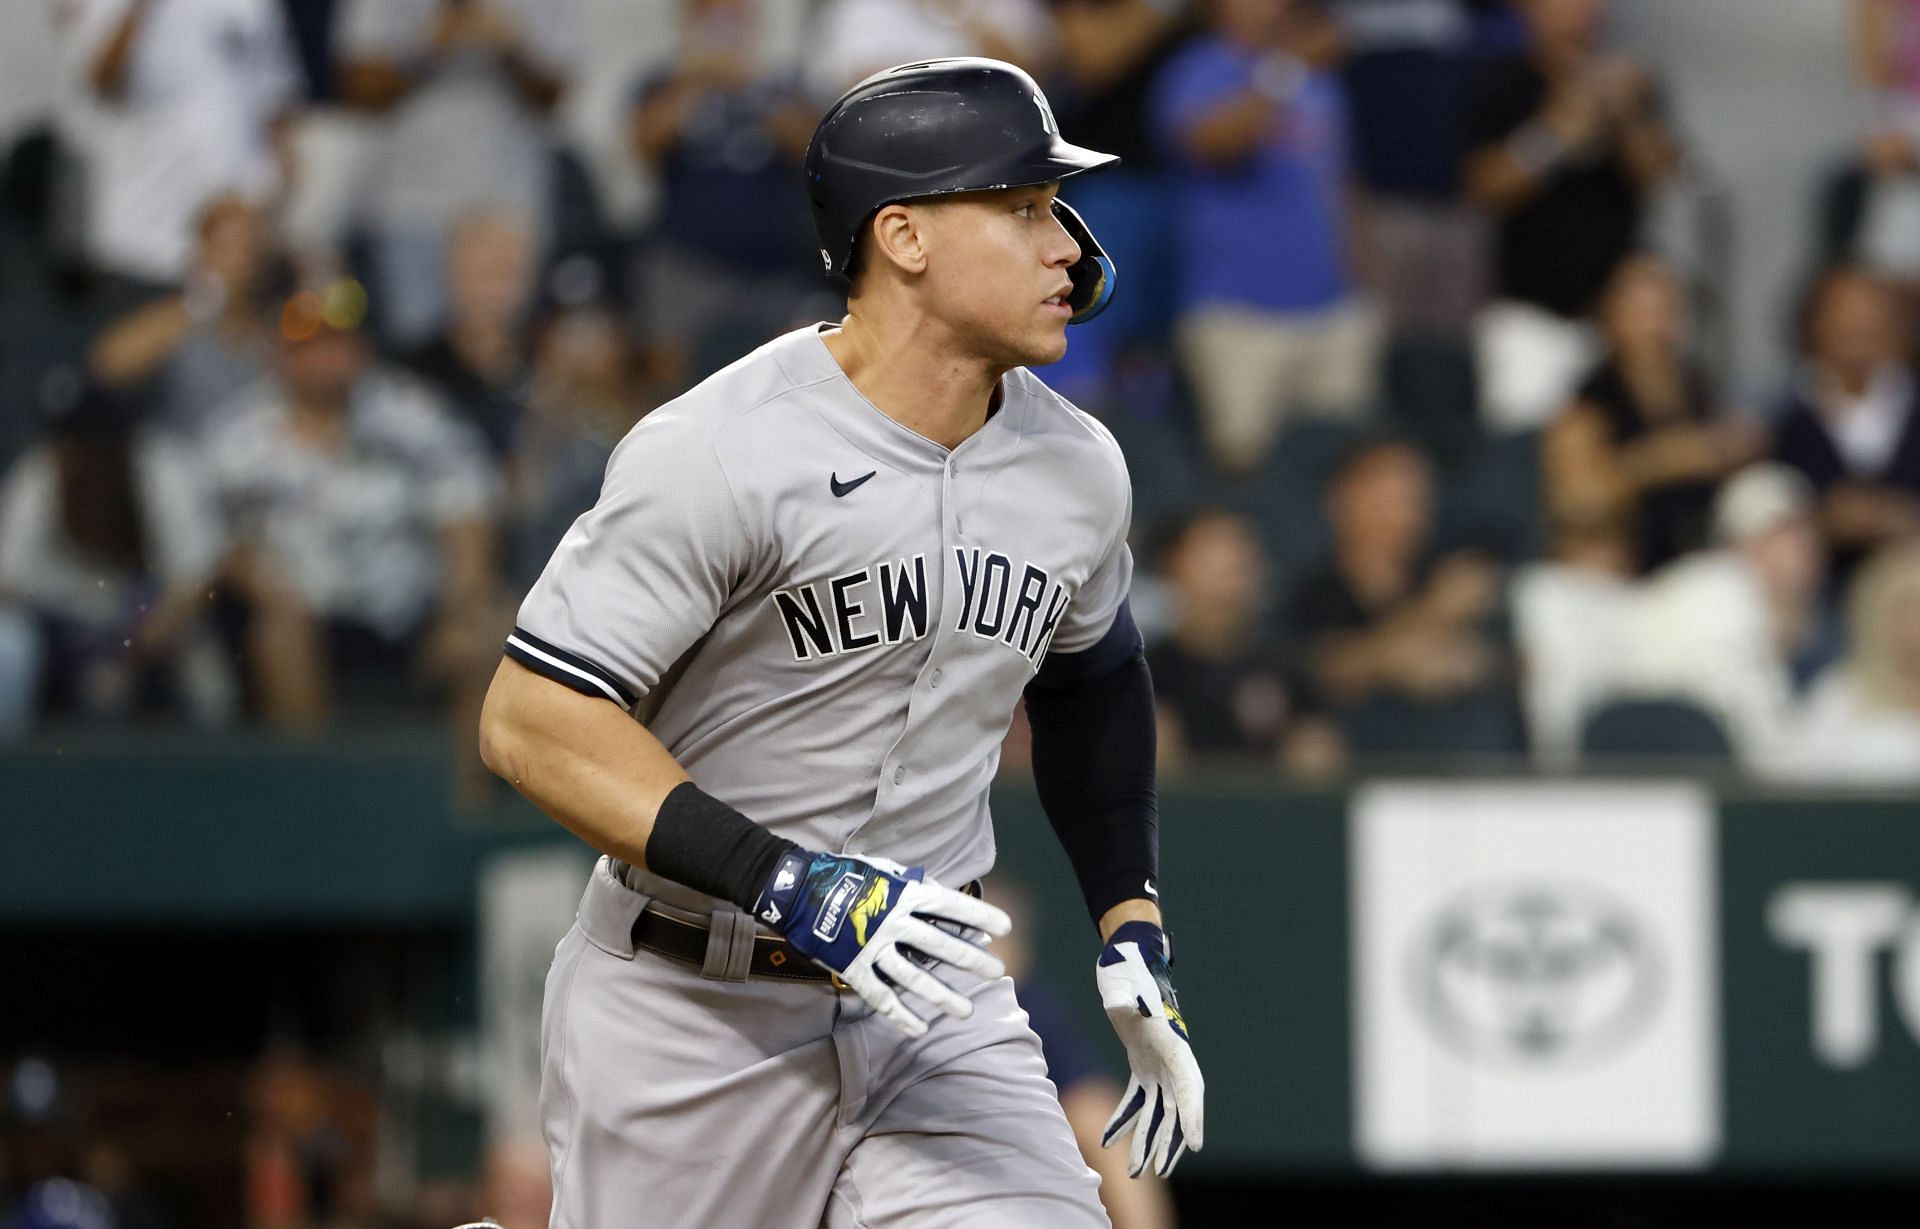 Aaron Judge has been immense for the Yankees in 2022